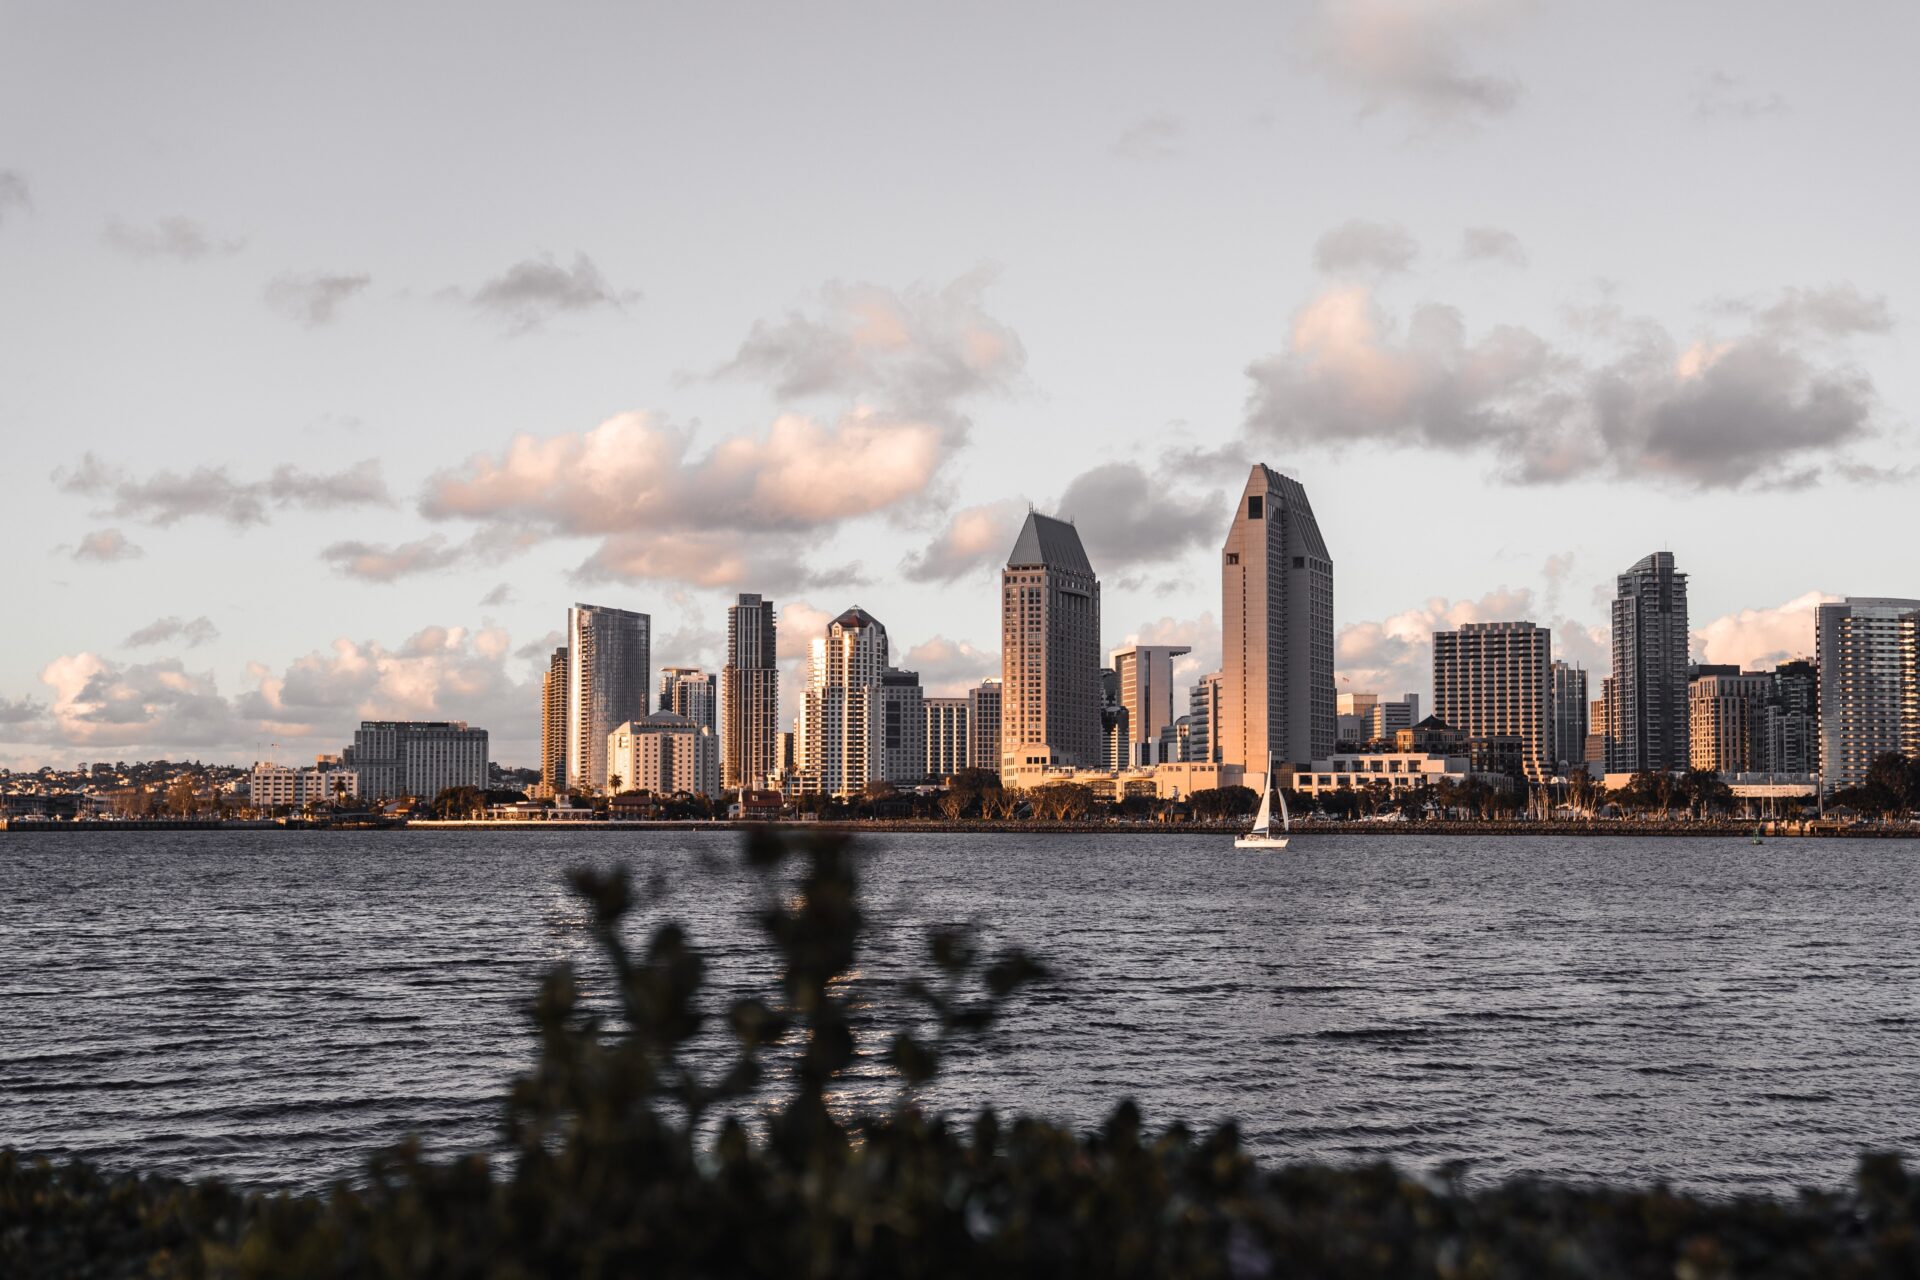 A view of the San Diego skyline during sunset from Coronado Island